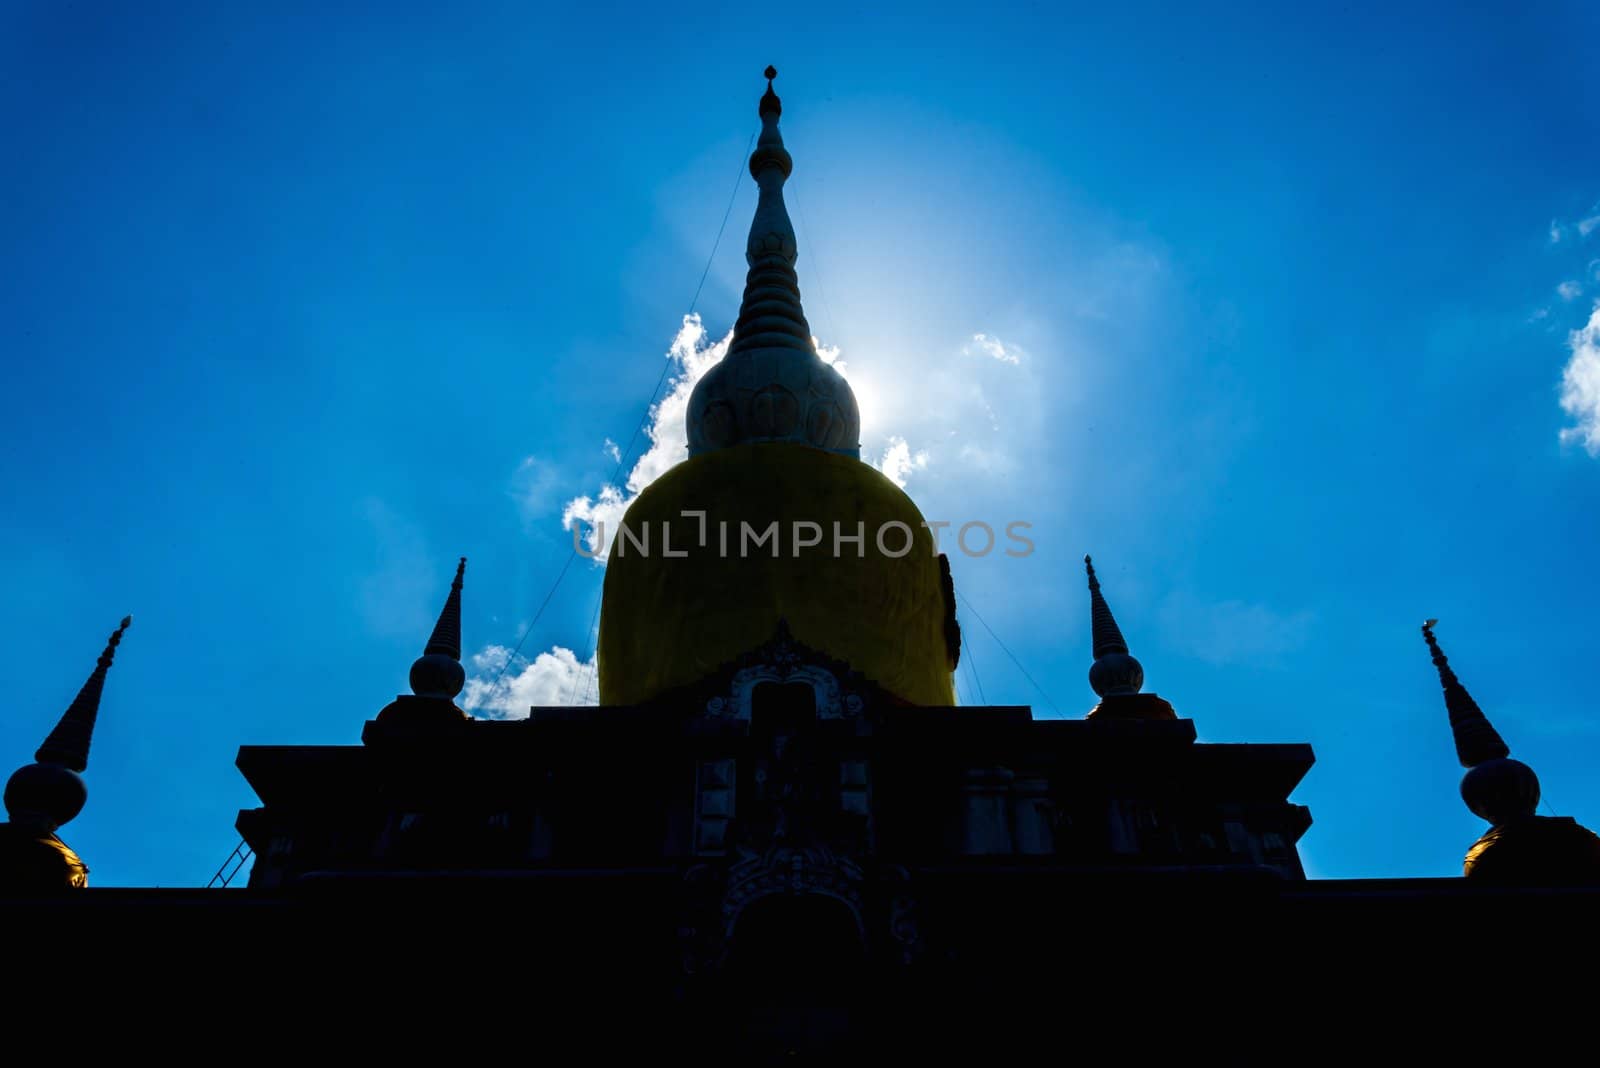 Silhouette Buddha's relics in Thailand, Name is phra tard na dun by wmitrmatr